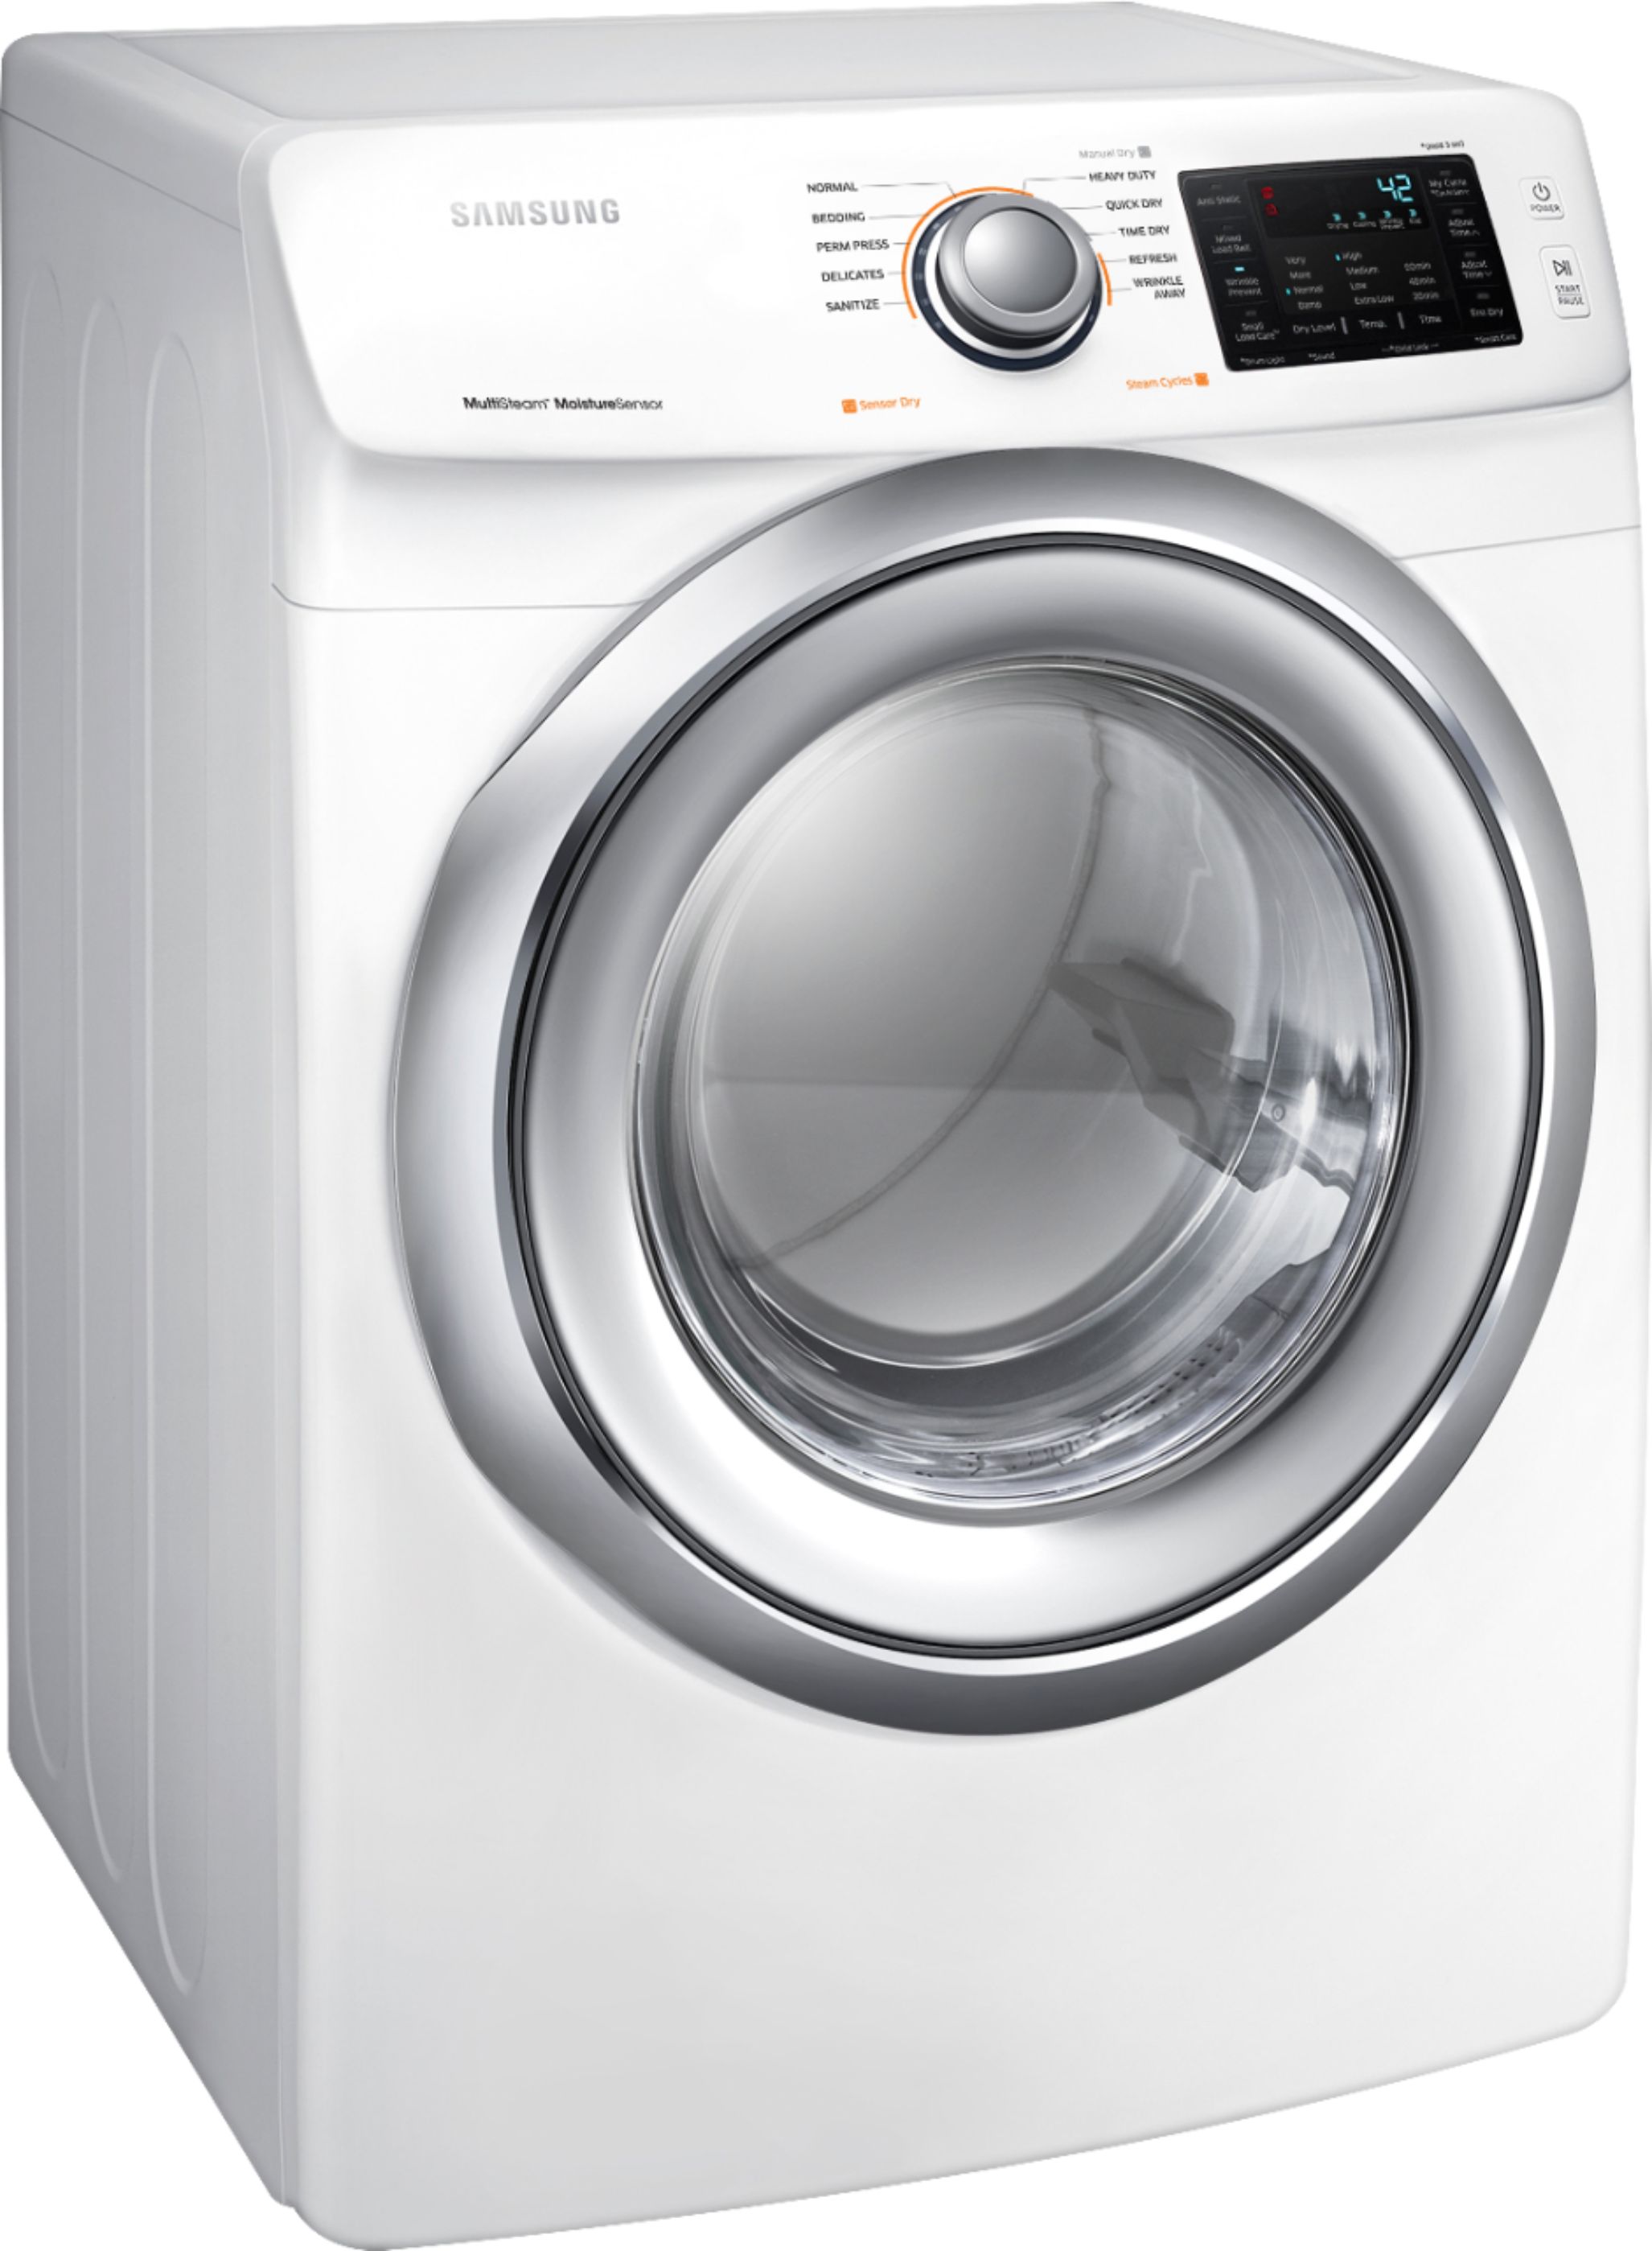 Samsung 7.5 Cu. Ft. 10Cycle Gas Dryer with Steam White DVG45N5300W Best Buy